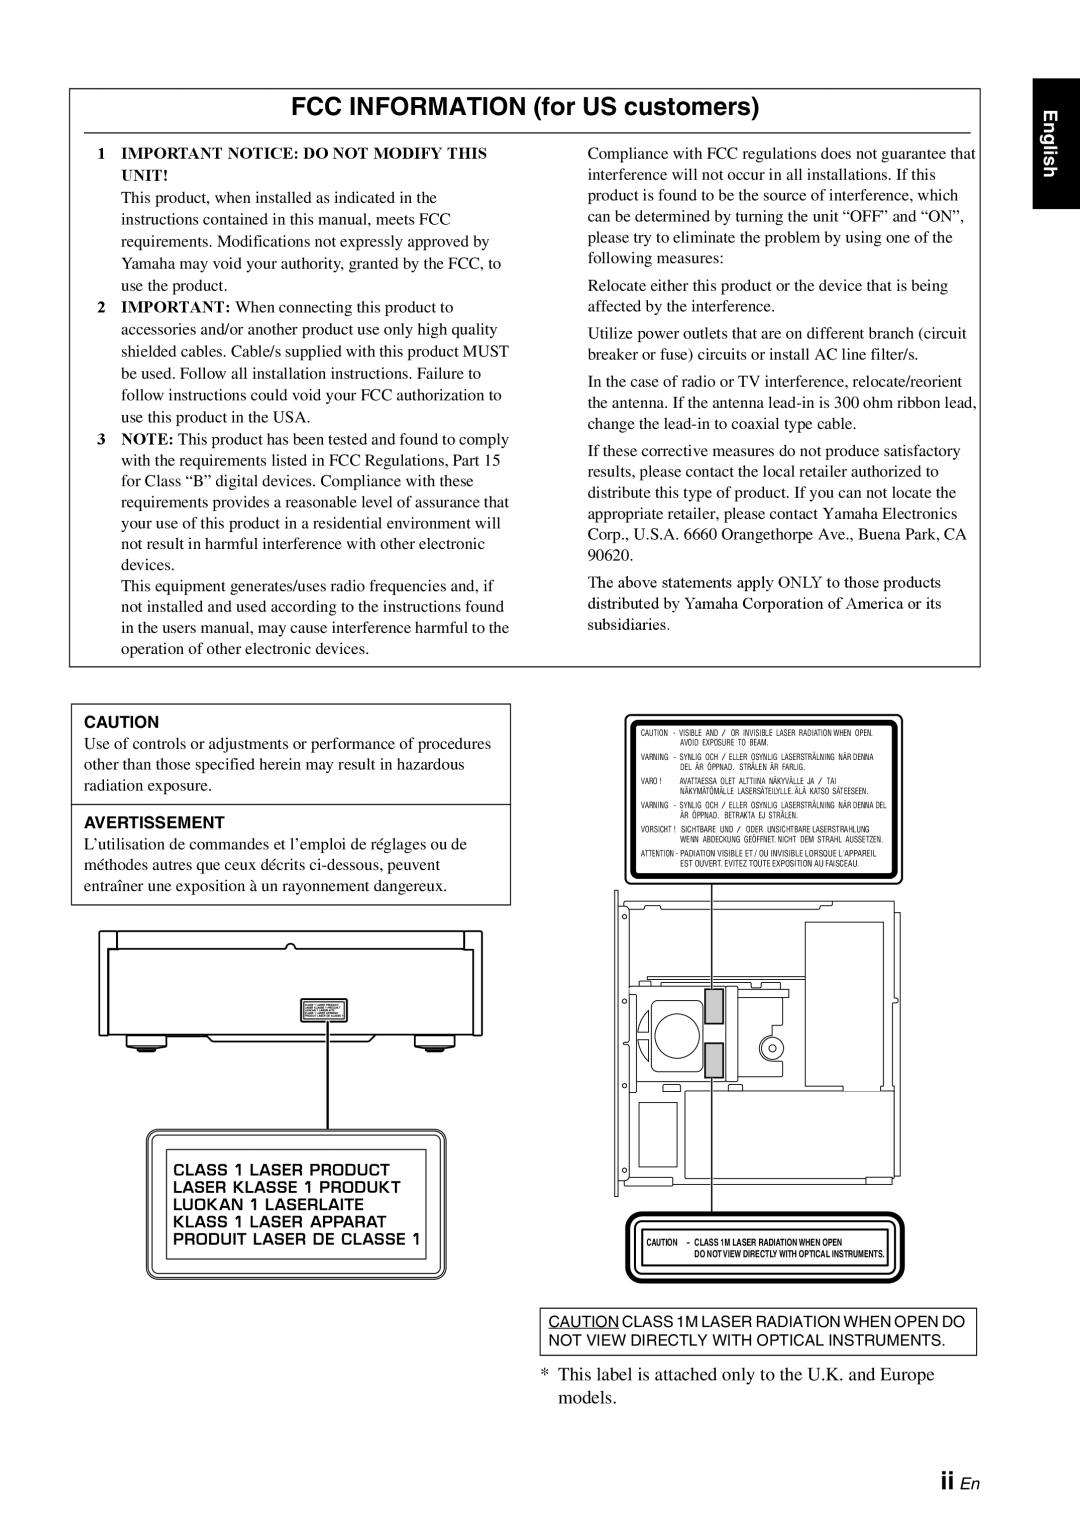 Yamaha CD-S1000 FCC INFORMATION for US customers, ii En, 1IMPORTANT NOTICE DO NOT MODIFY THIS UNIT, Avertissement 